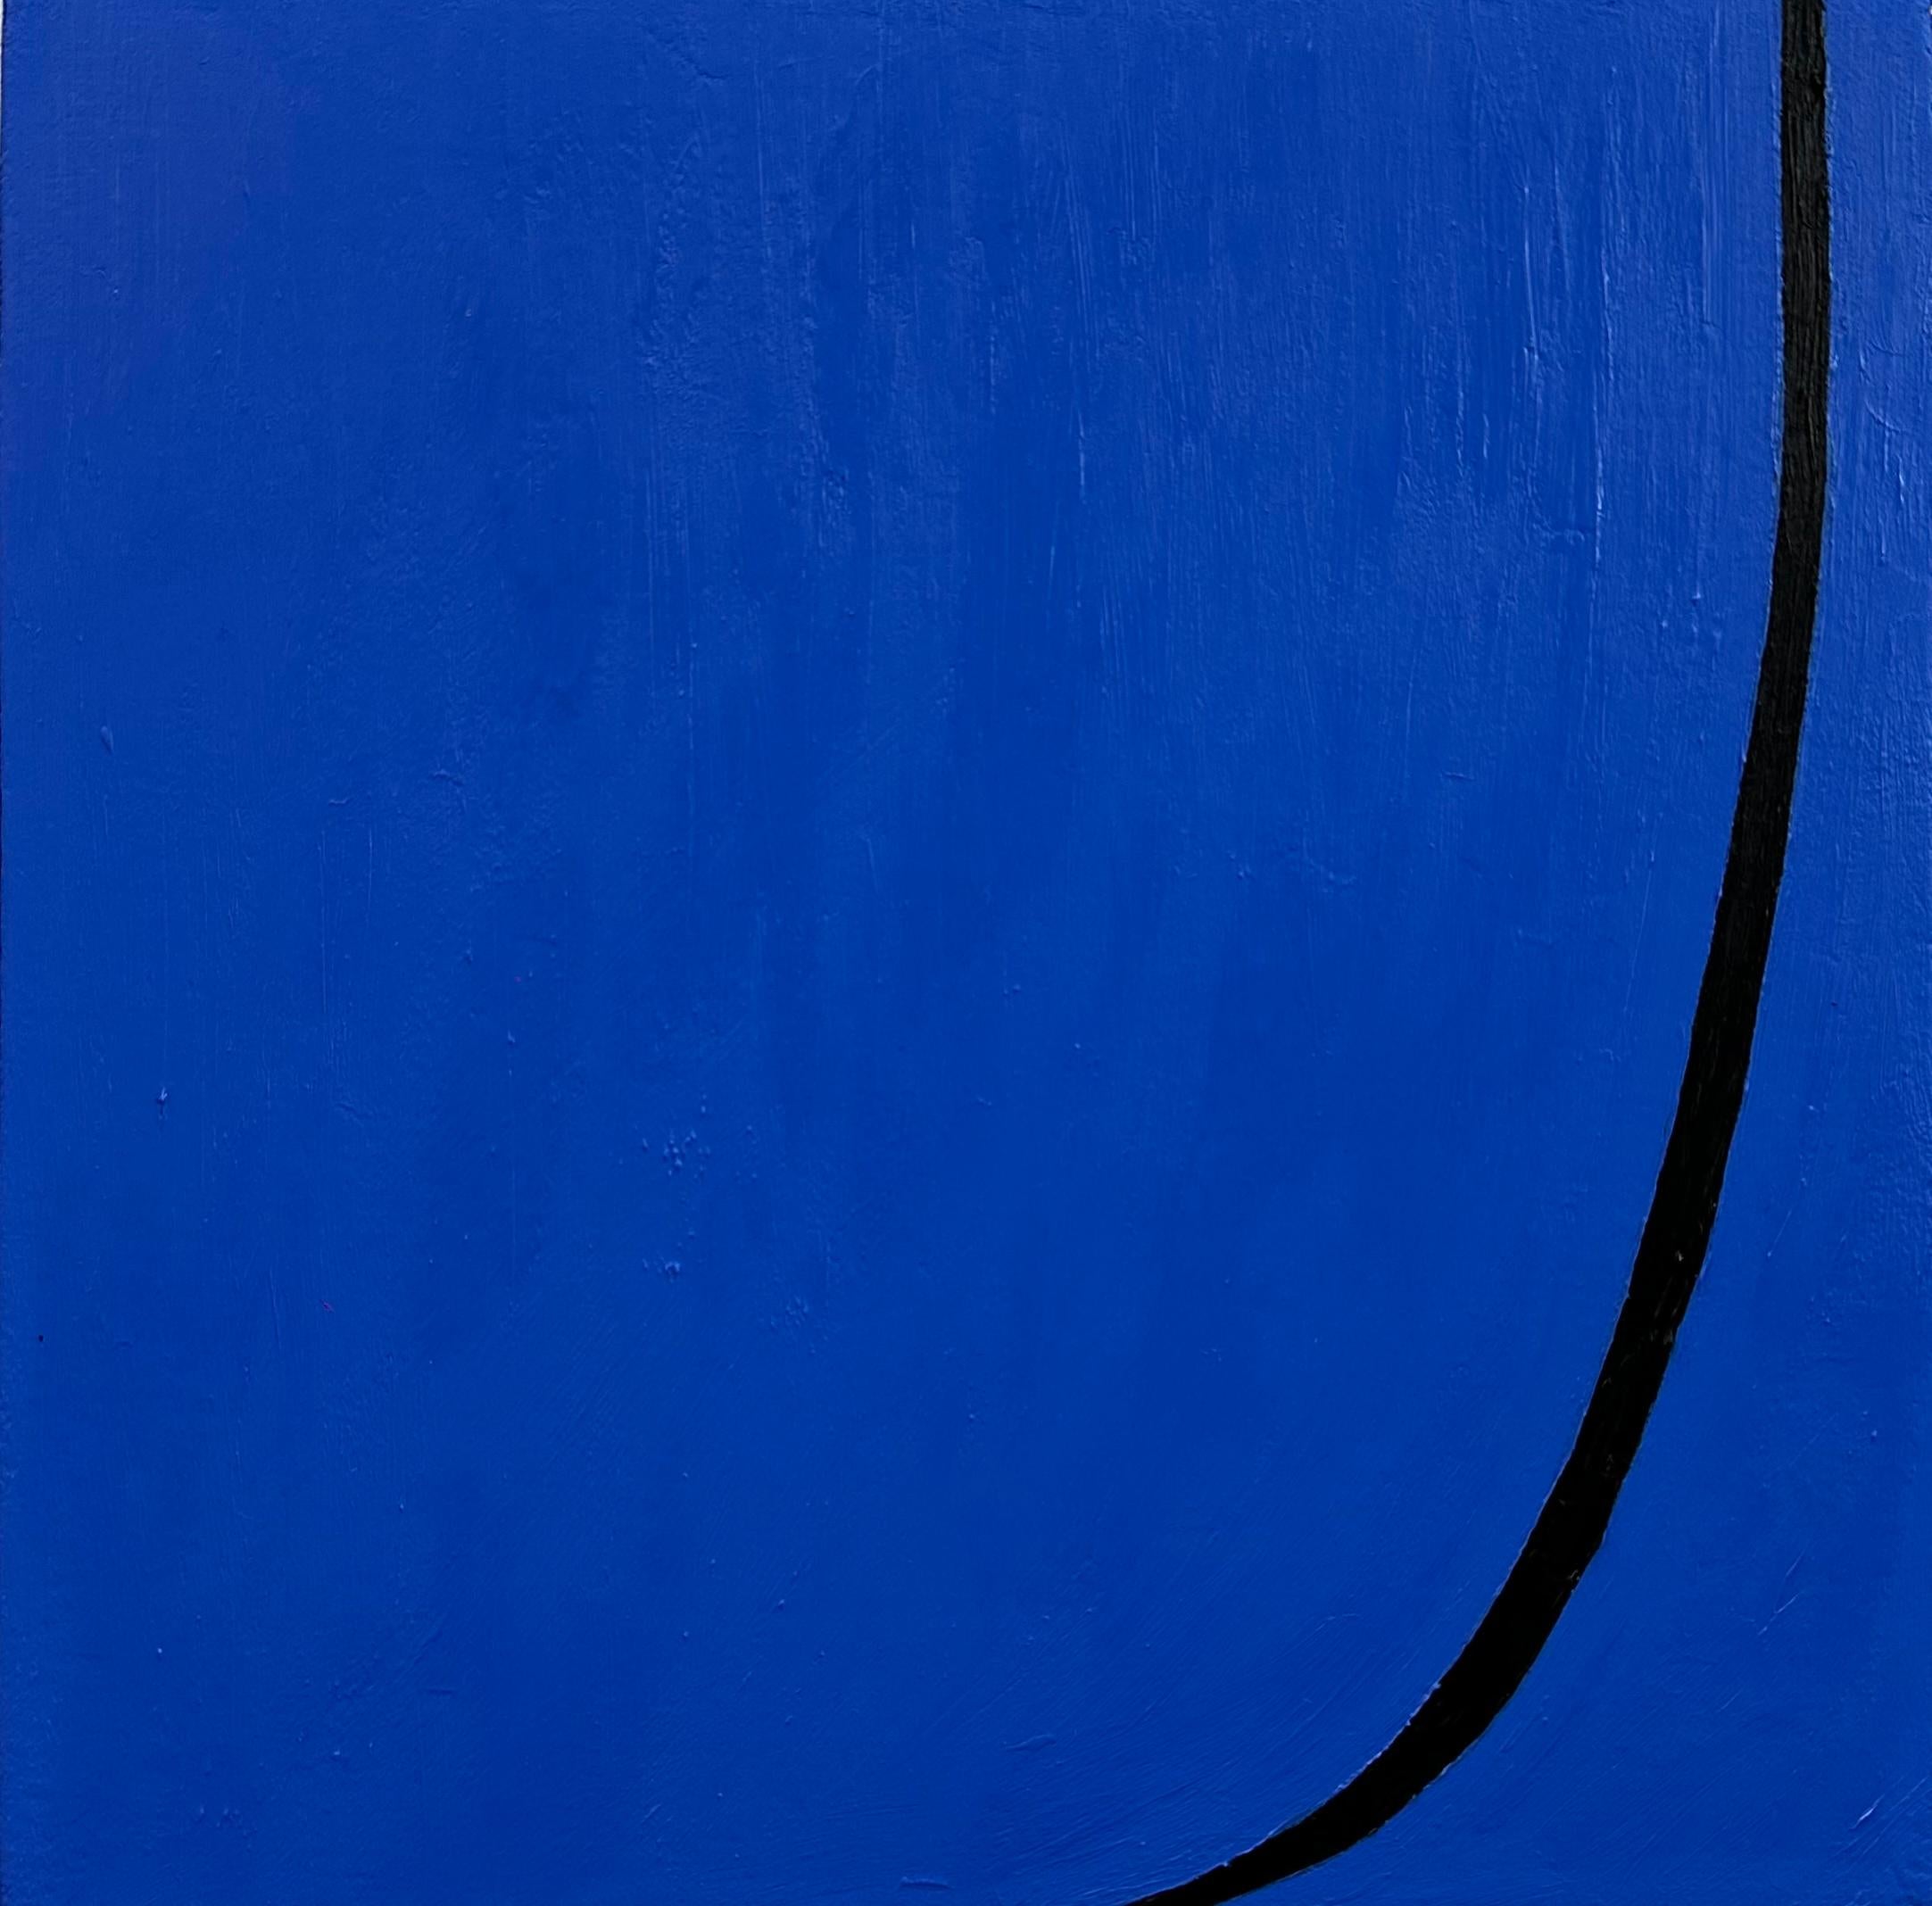 Nicolás Guzmán Abstract Painting - Untitled - abstract oil painting, lines, blue & black